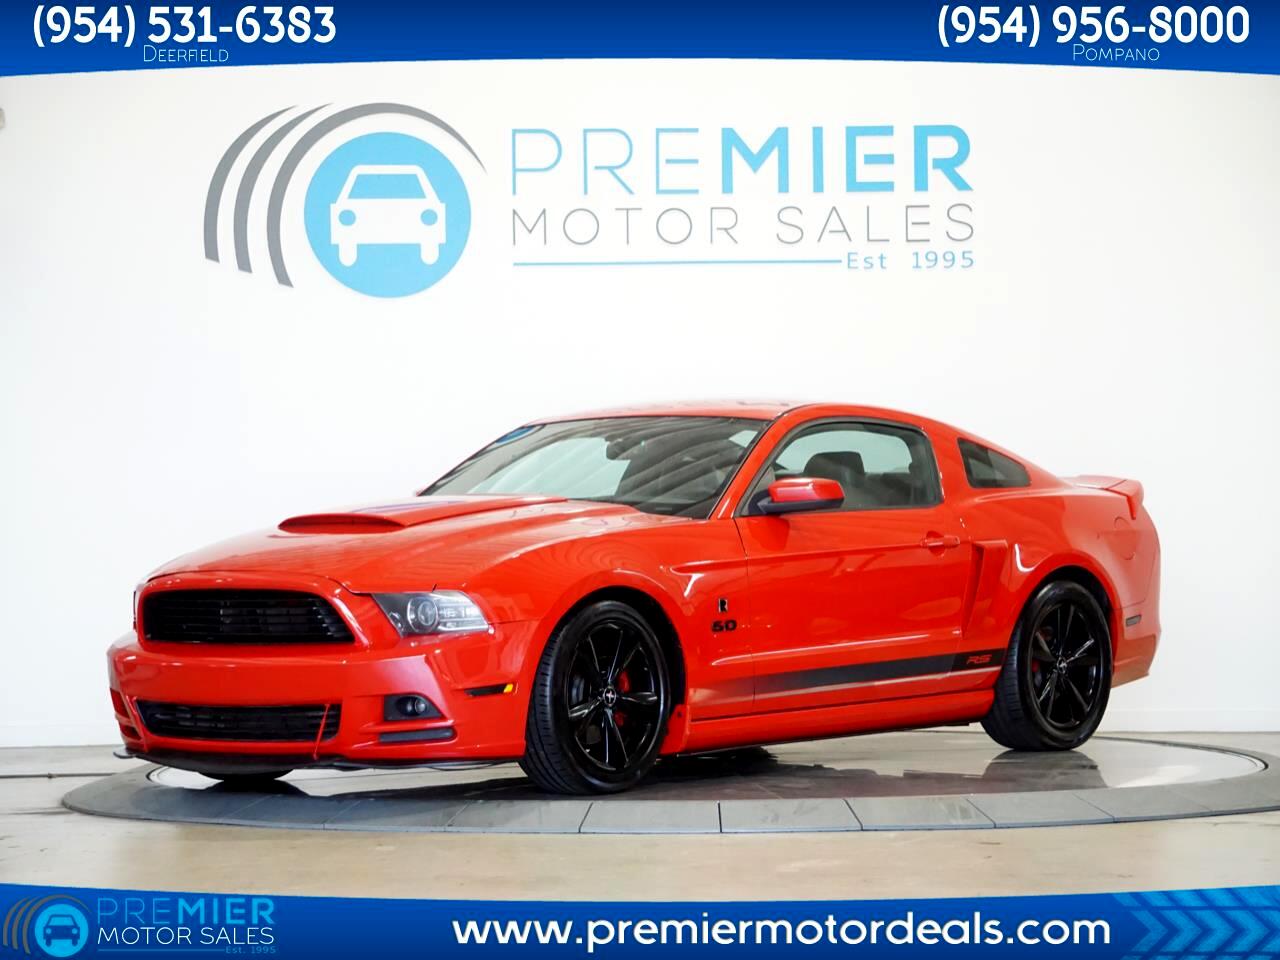 Ford Mustang V6 Coupe 2014